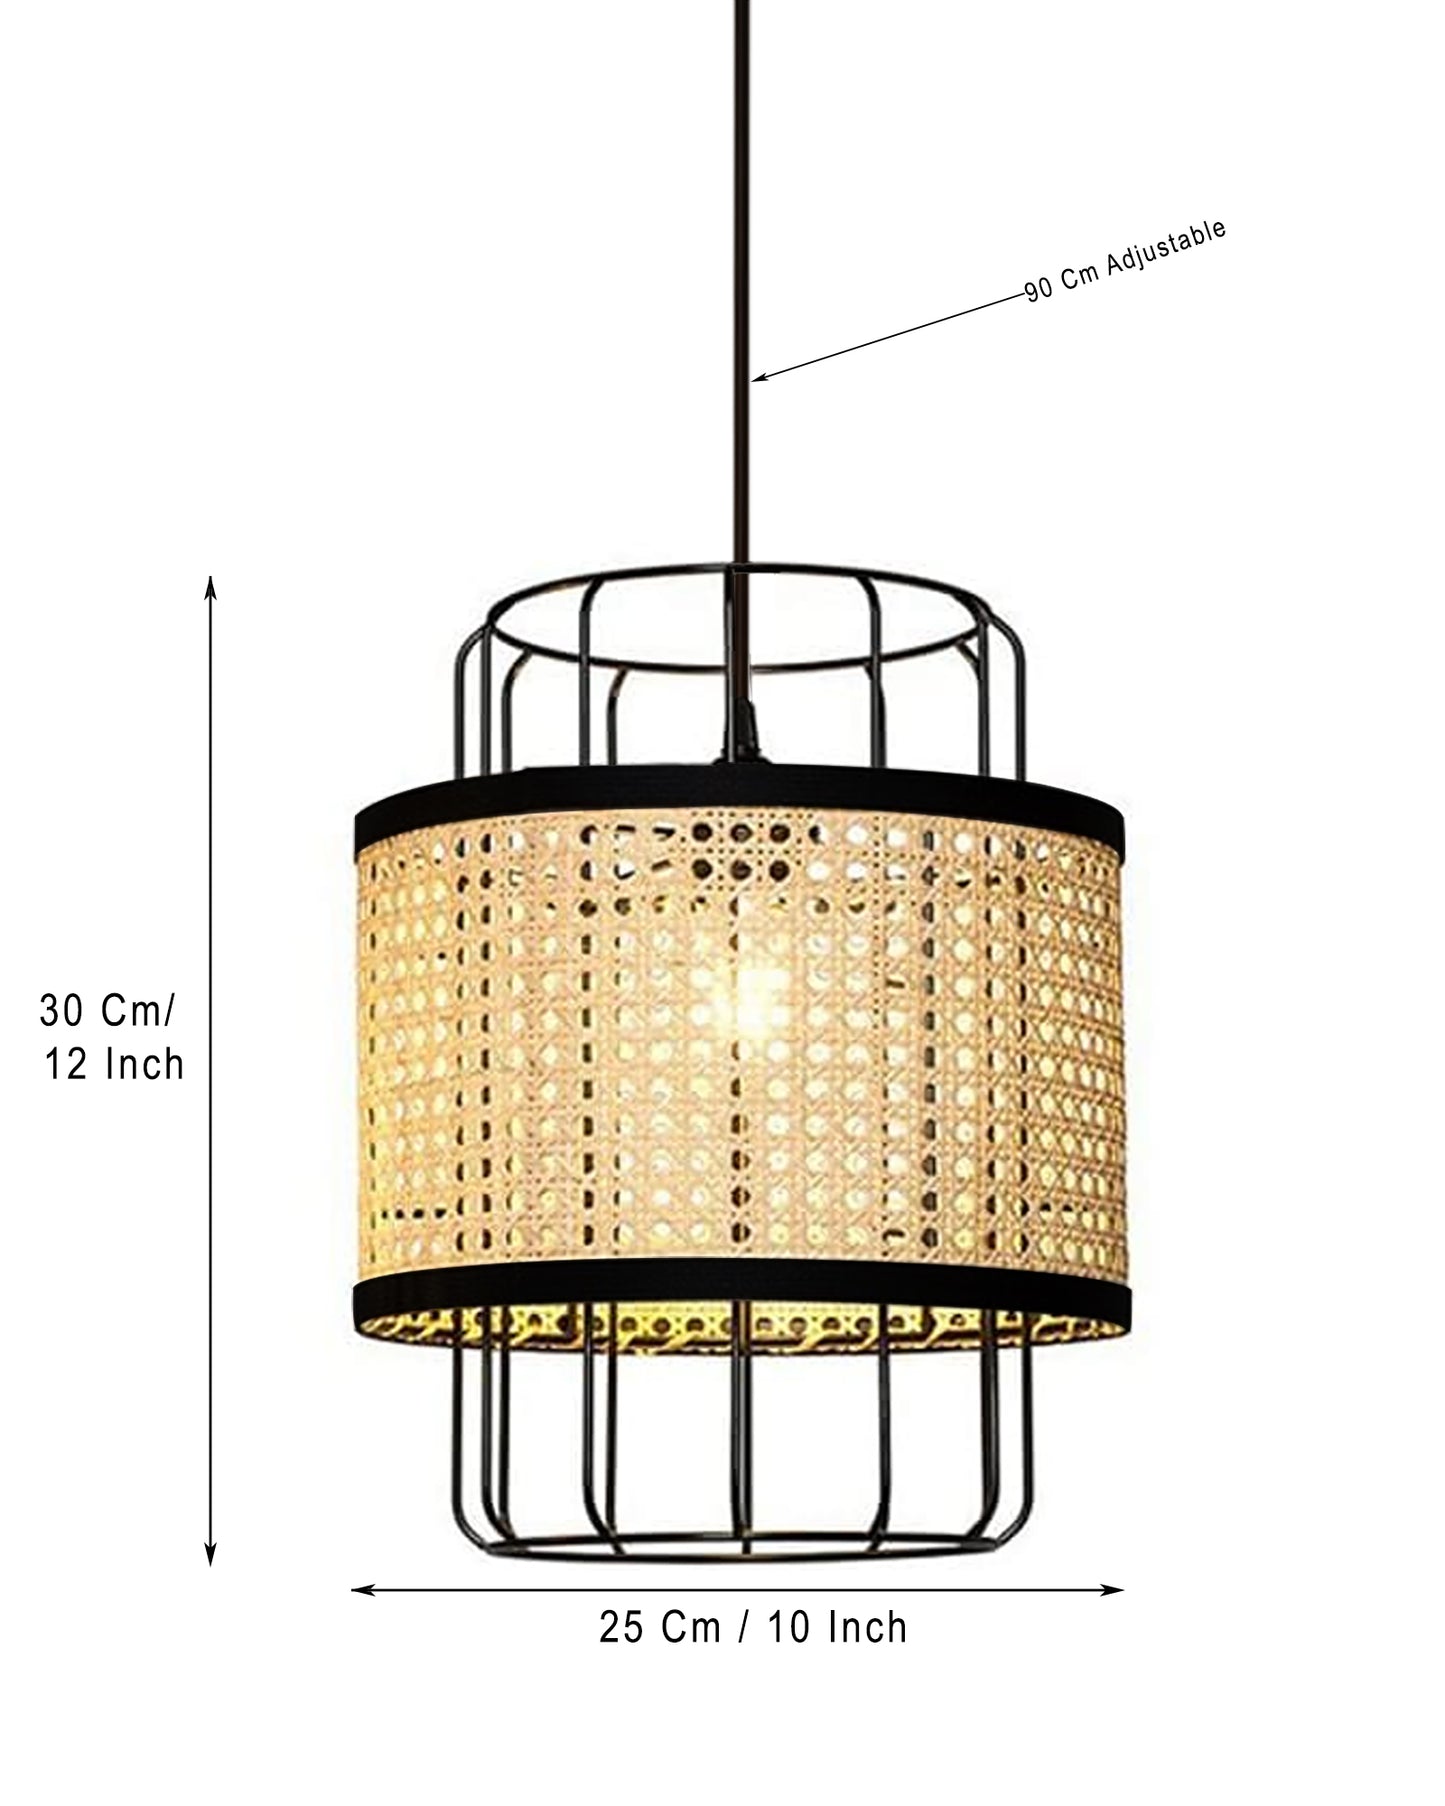 12" Hand Woven Natural Rattan Cane Webbing Wicker Pendant Light Fixtures, Boho Pendant Lights with Rattan Basket Shade for Farmhouse Kitchen Island Dining Room Living Room